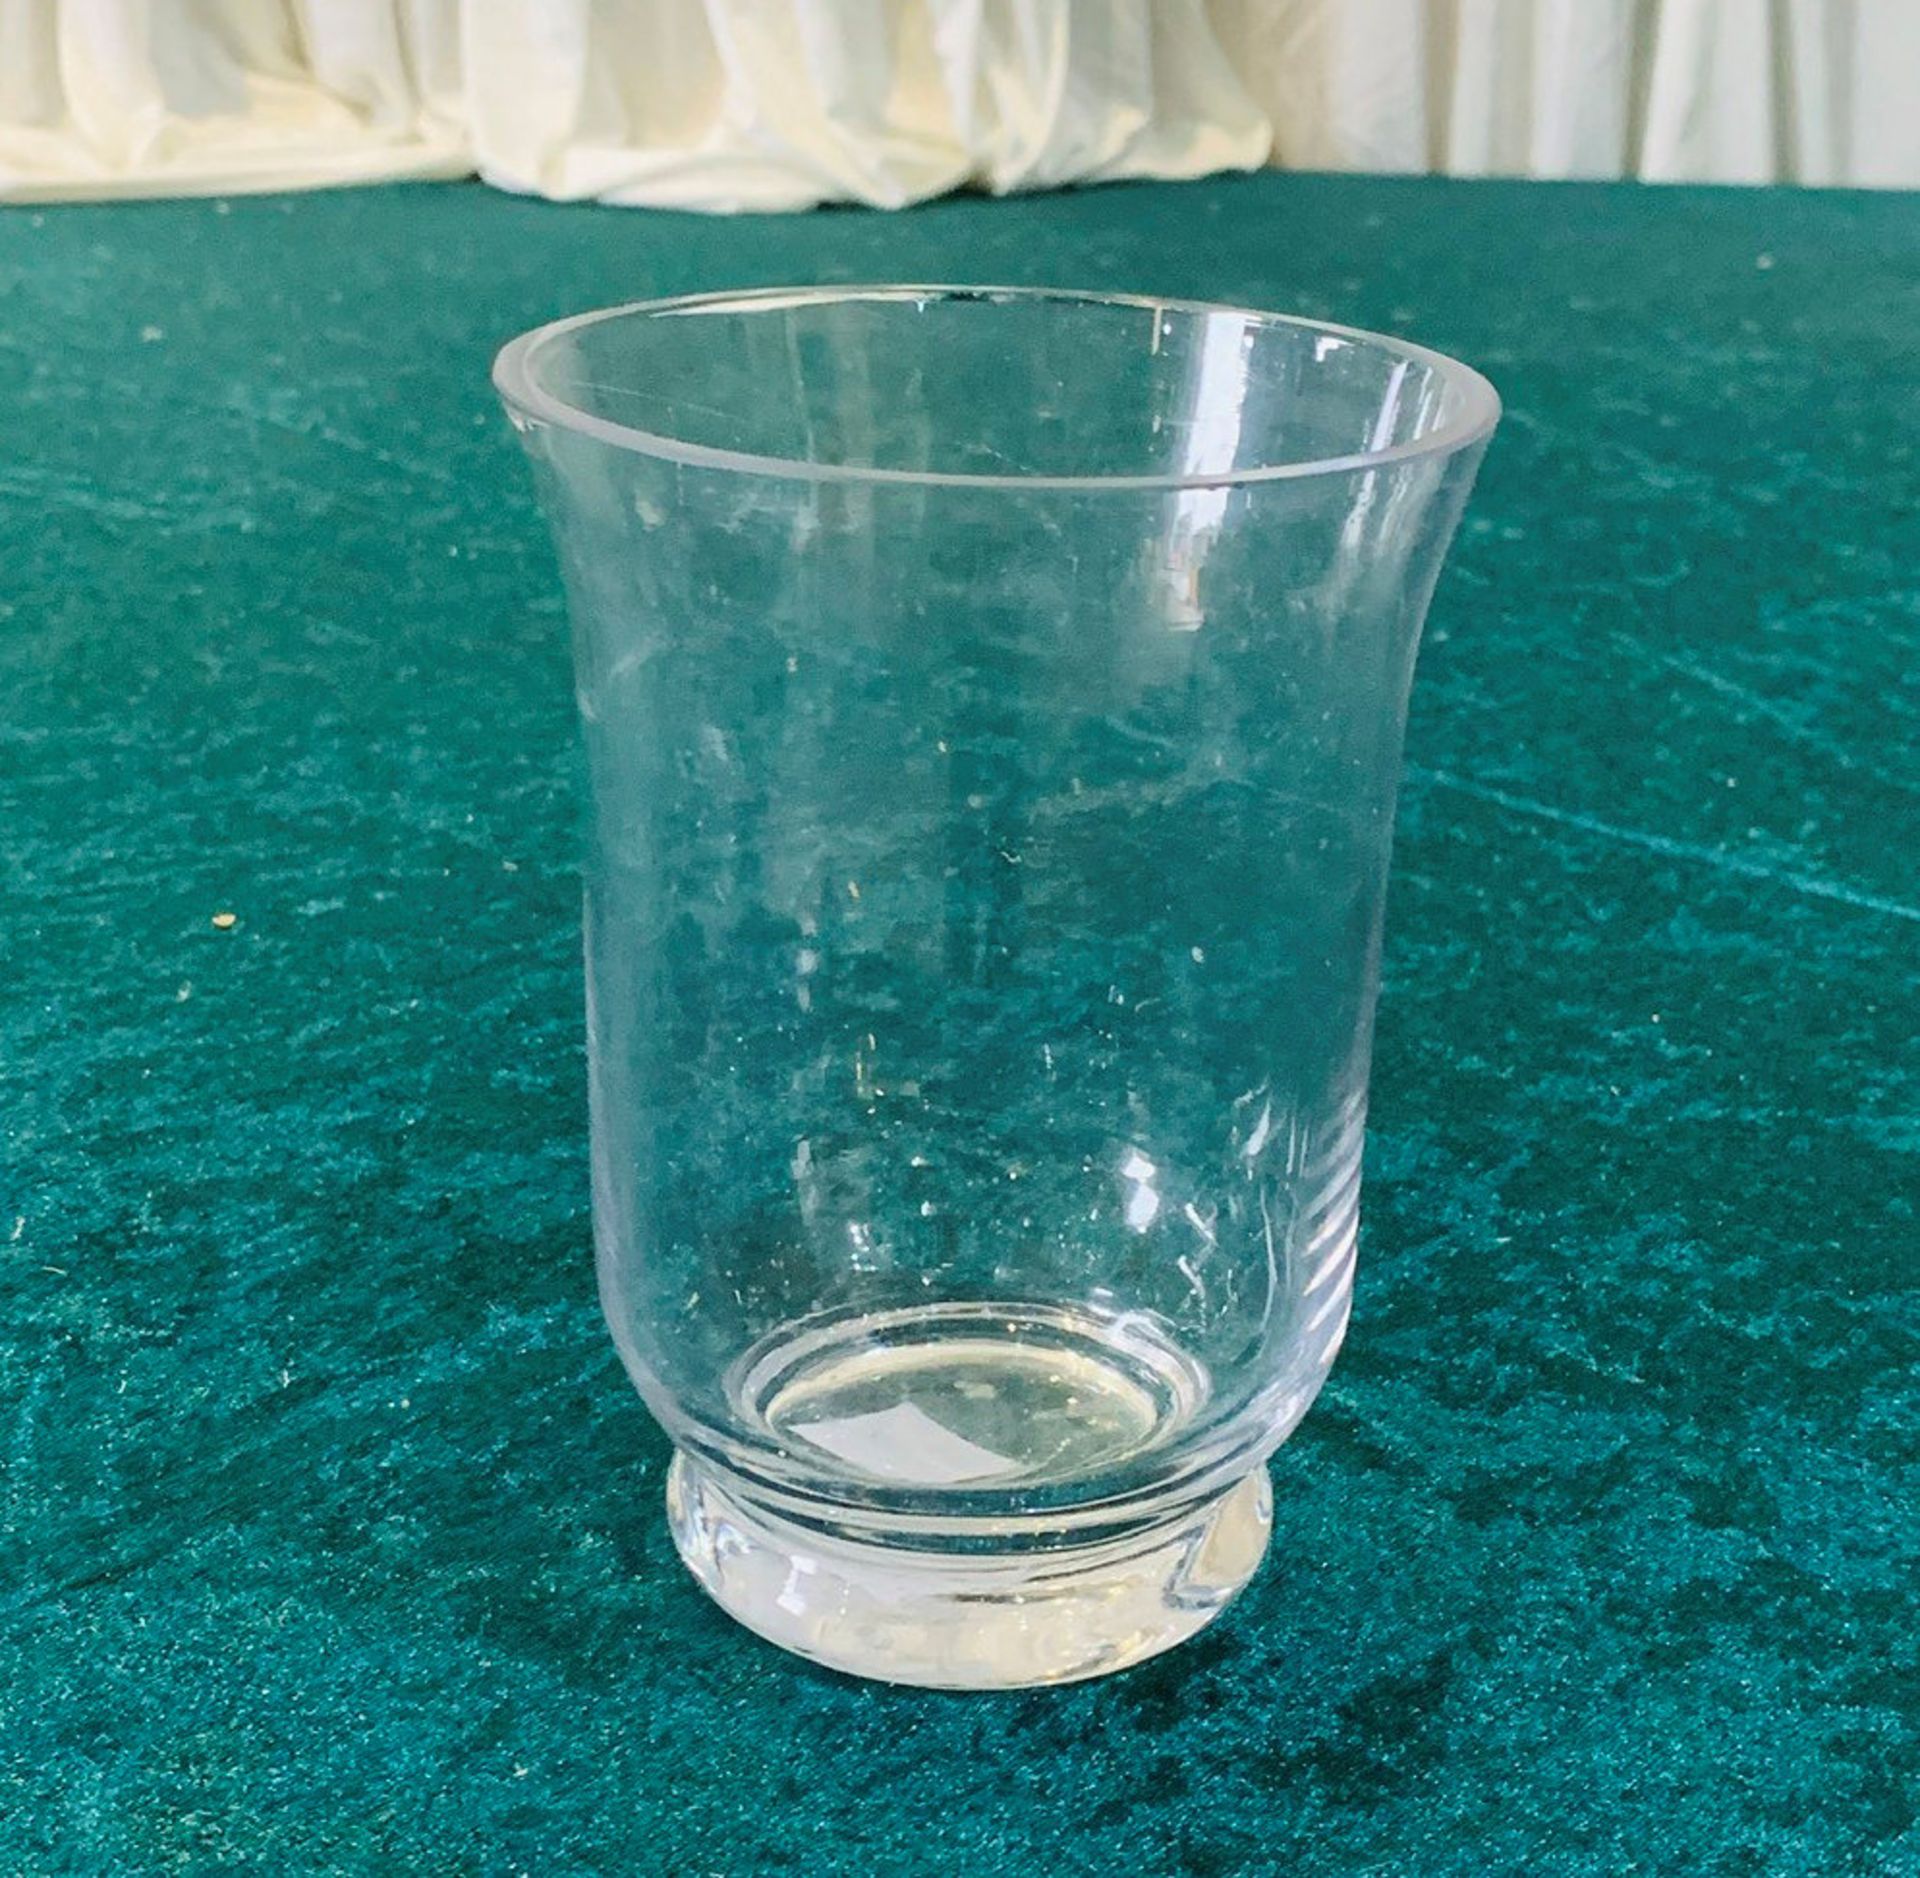 20 x Small Hurricane Vases - Dimensions: 15x10.5cm - Ref: Lot 39 - CL548 - Location: Leicester